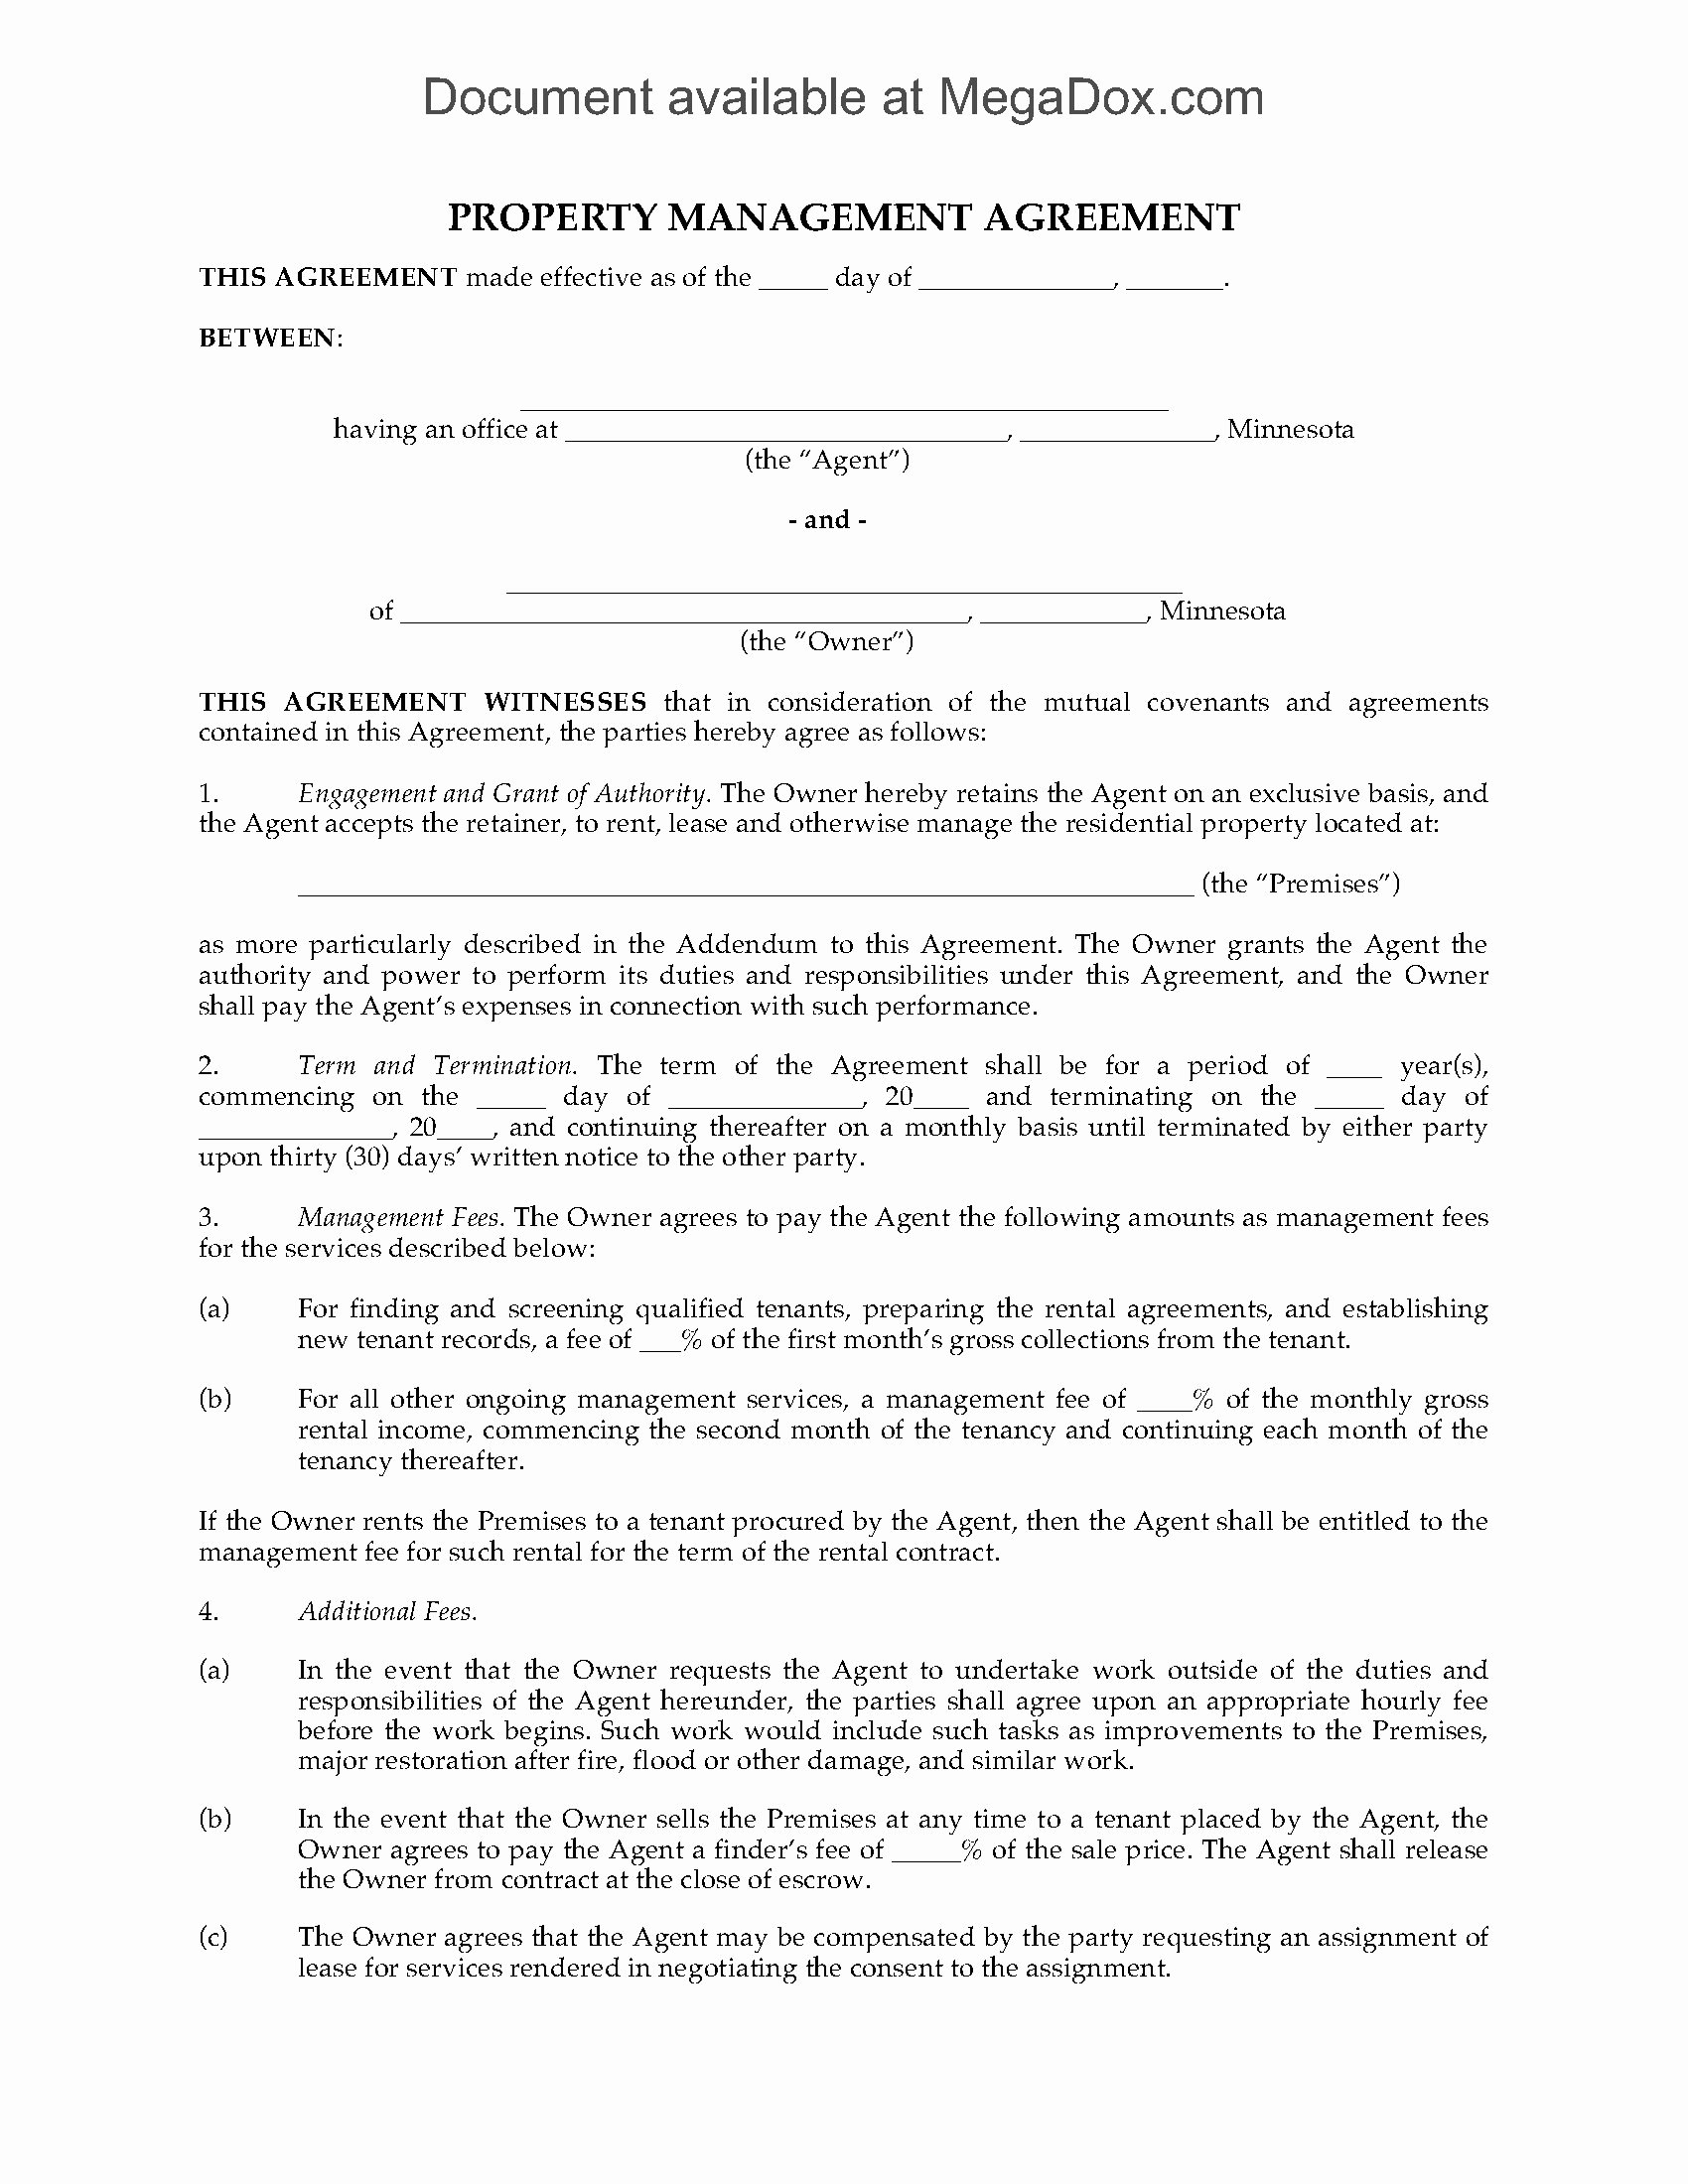 Property Management Contract Template Luxury Minnesota Rental Property Management Agreement